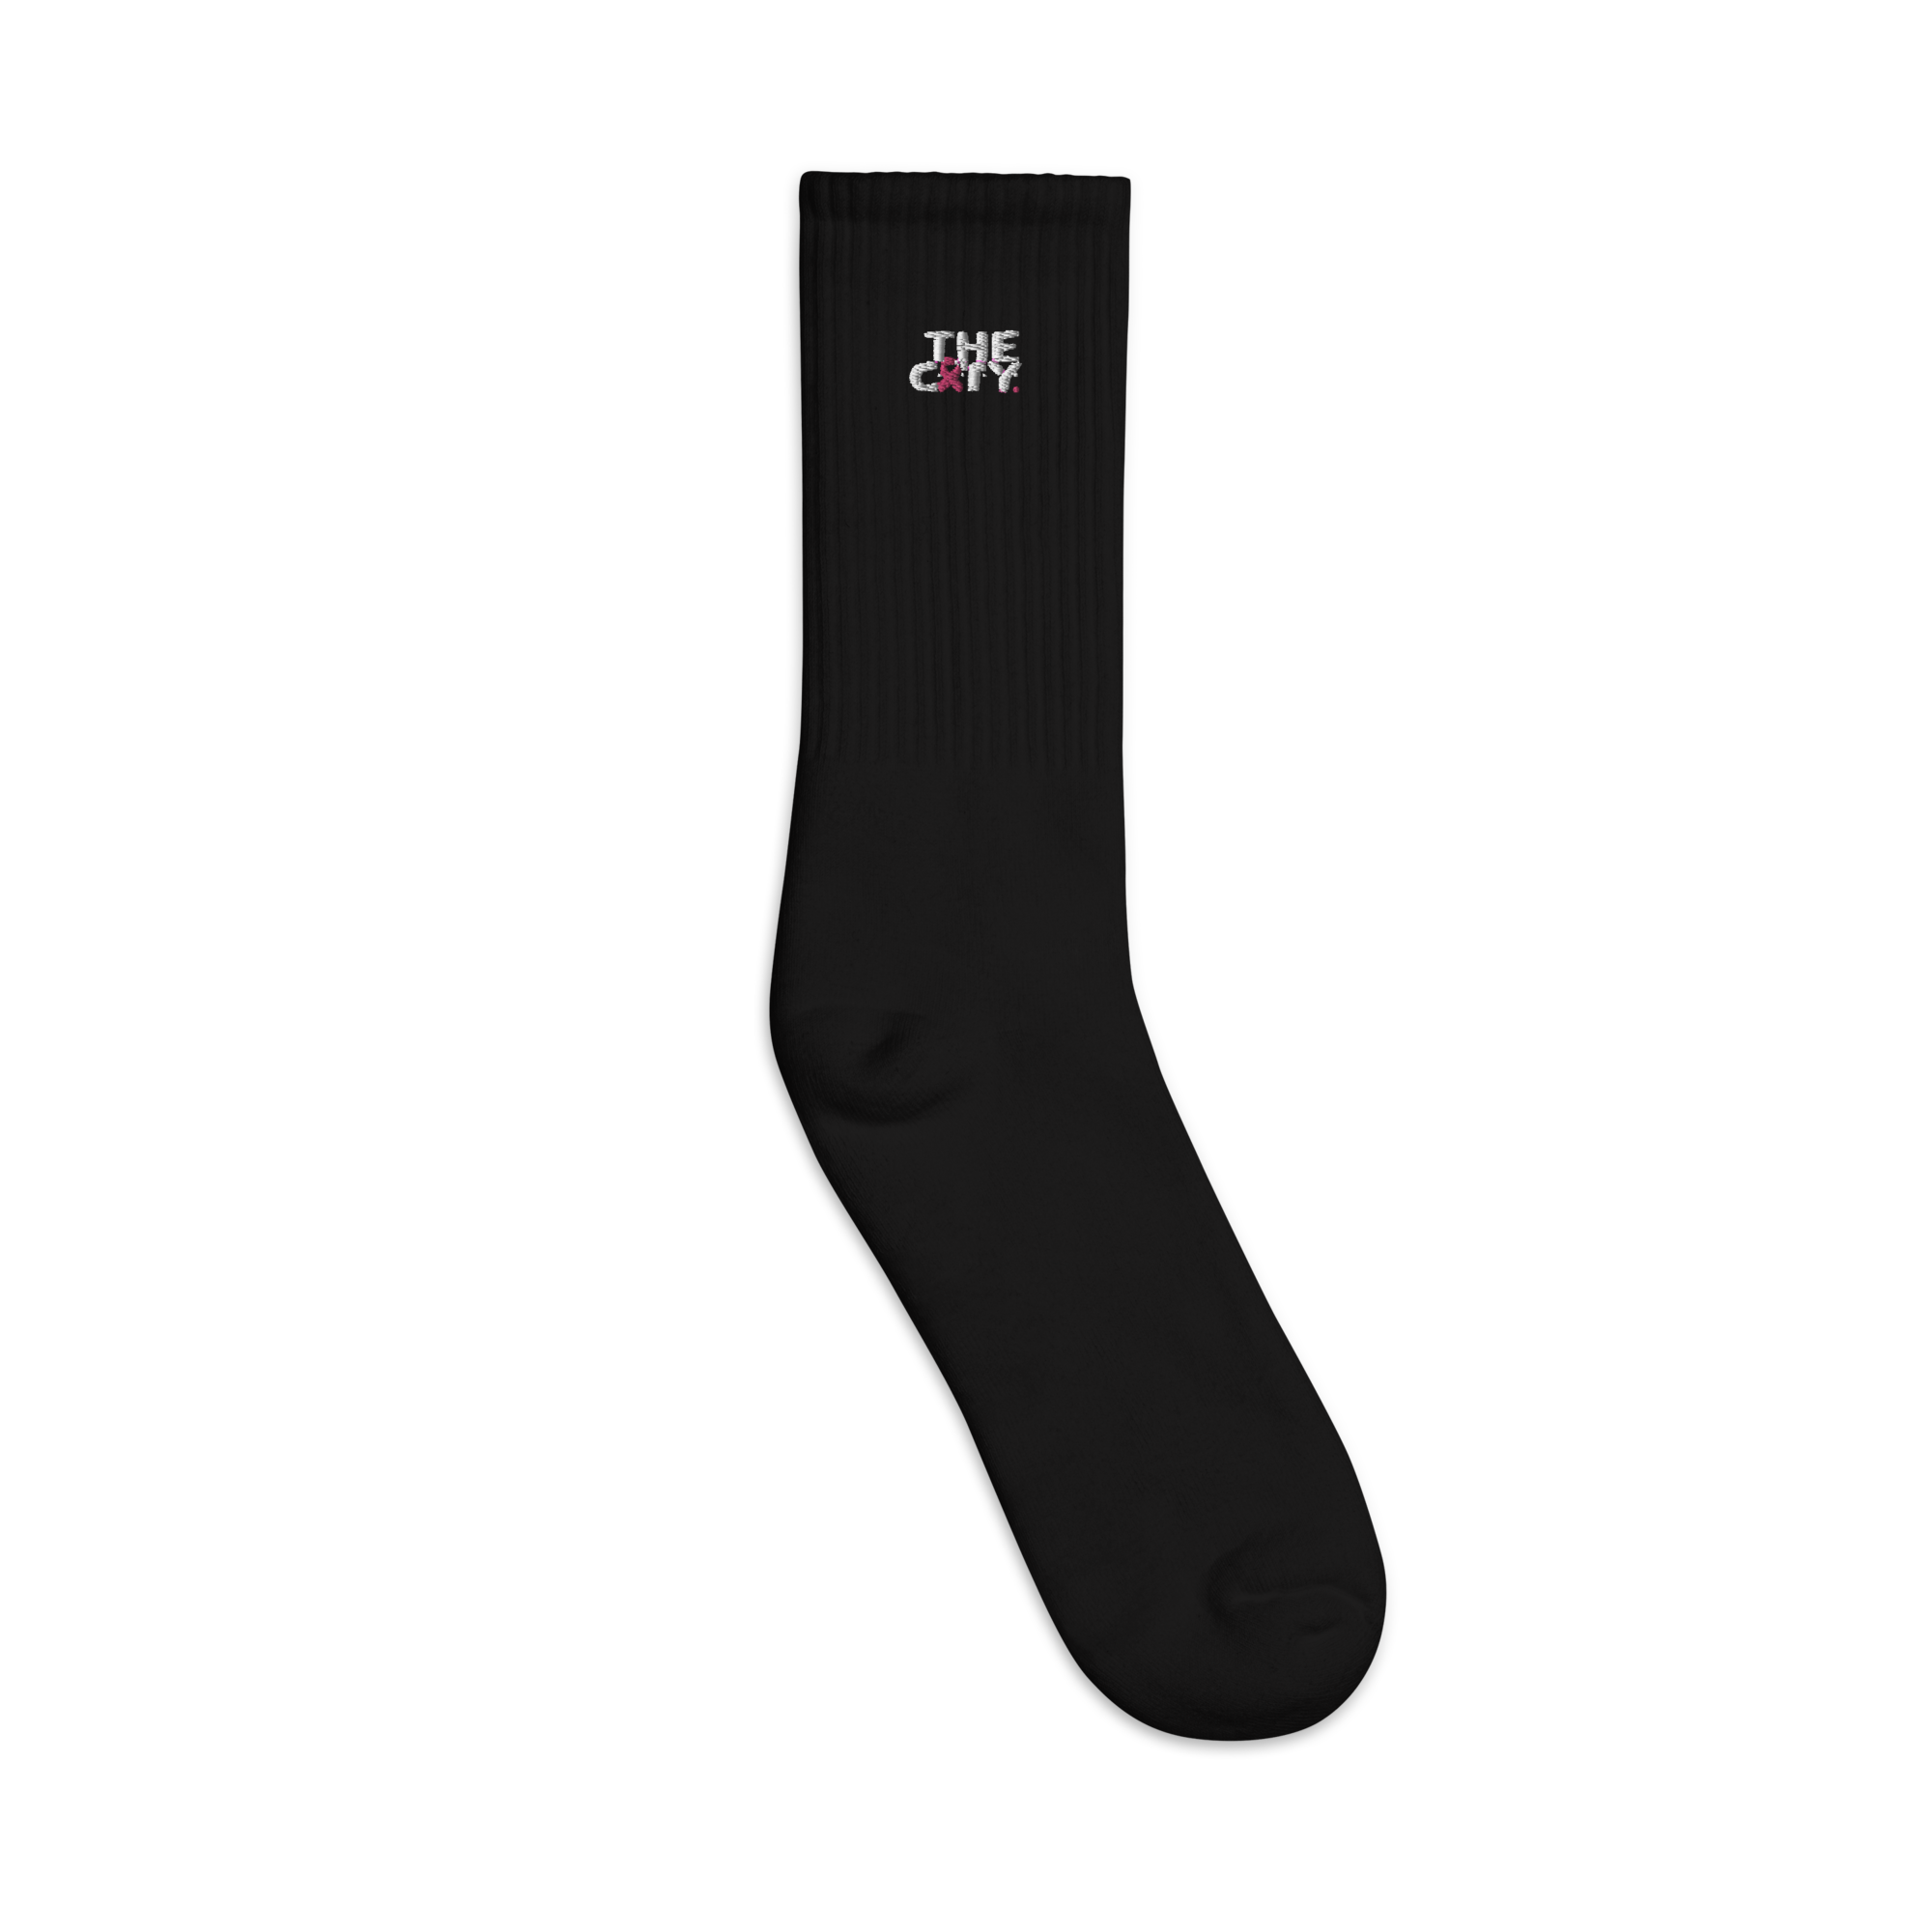 THE CITY Breast Cancer Awareness BLK Embroidered socks